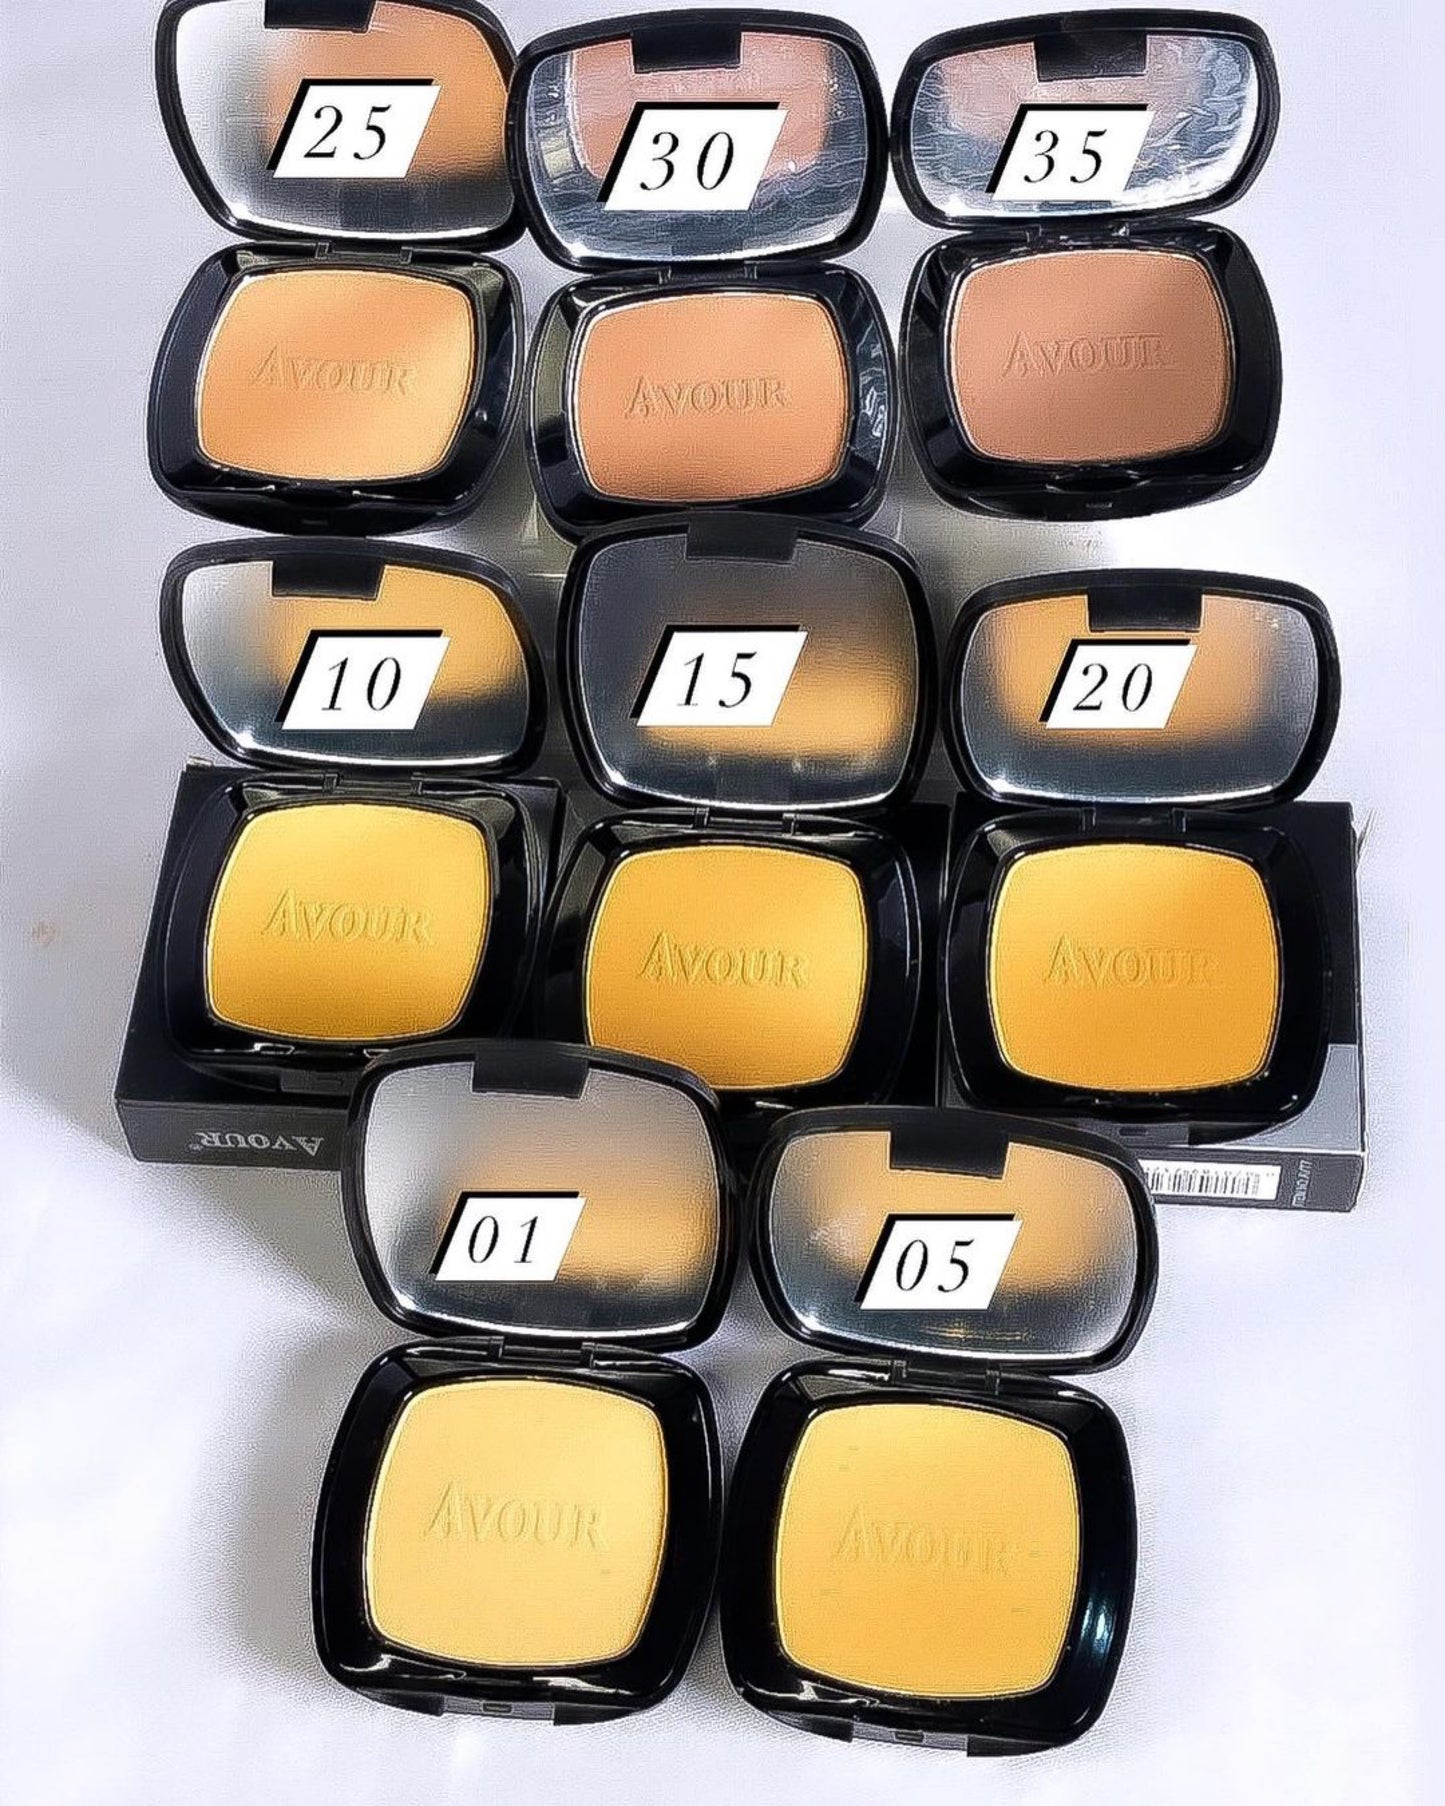 Avour Superstay Compact Powder.